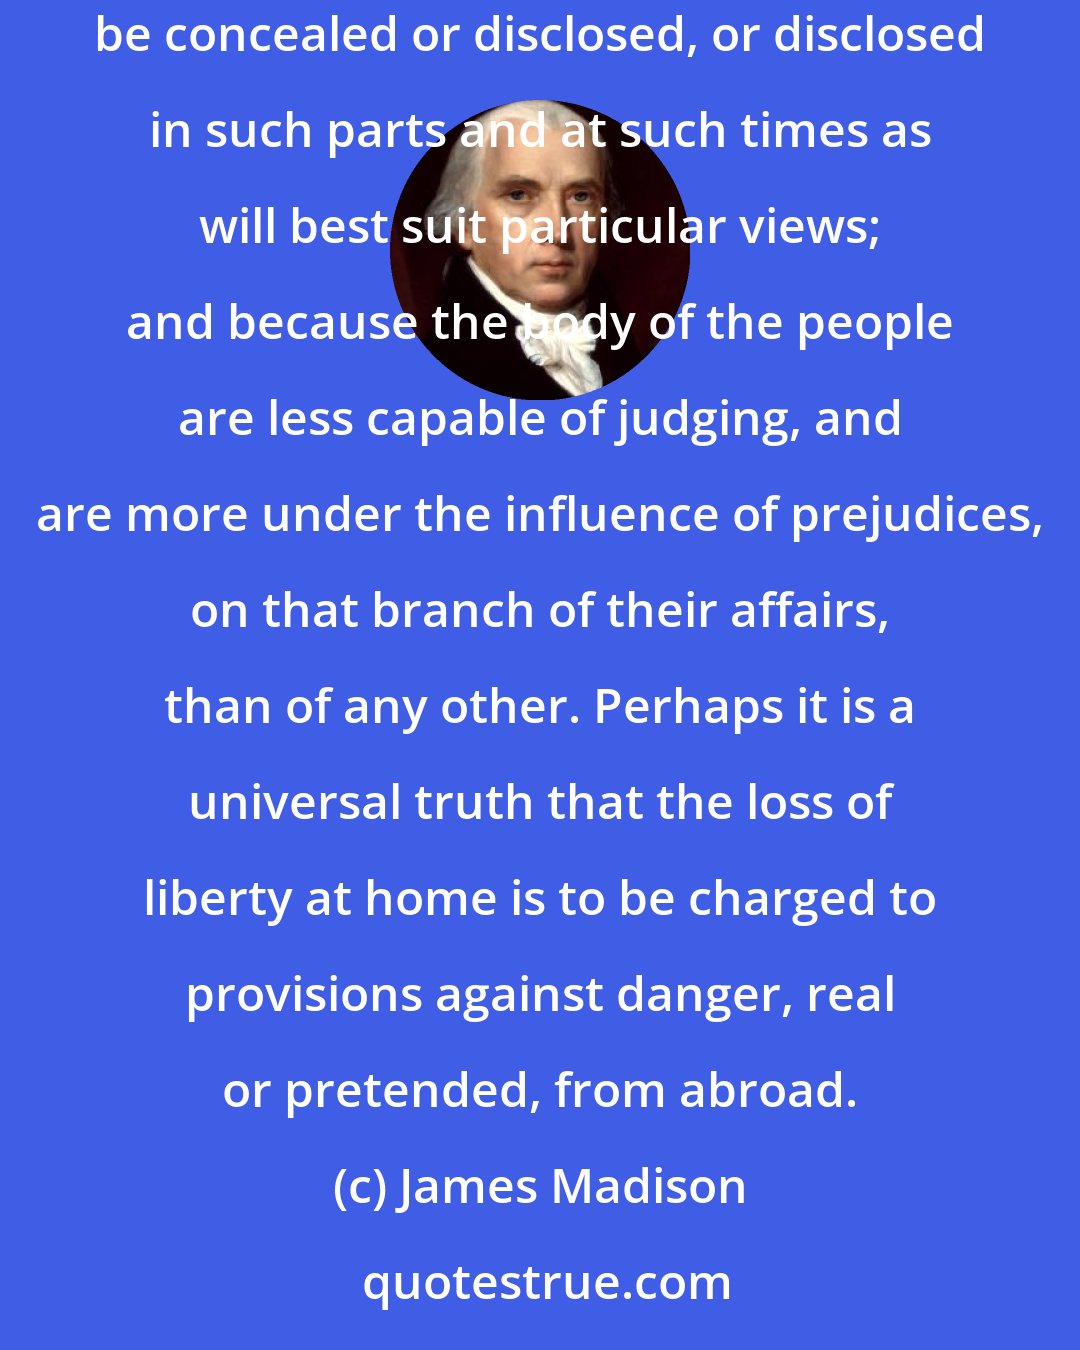 James Madison: The management of foreign relations appears to be the most susceptible of abuse of all the trusts committed to a Government, because they can be concealed or disclosed, or disclosed in such parts and at such times as will best suit particular views; and because the body of the people are less capable of judging, and are more under the influence of prejudices, on that branch of their affairs, than of any other. Perhaps it is a universal truth that the loss of liberty at home is to be charged to provisions against danger, real or pretended, from abroad.